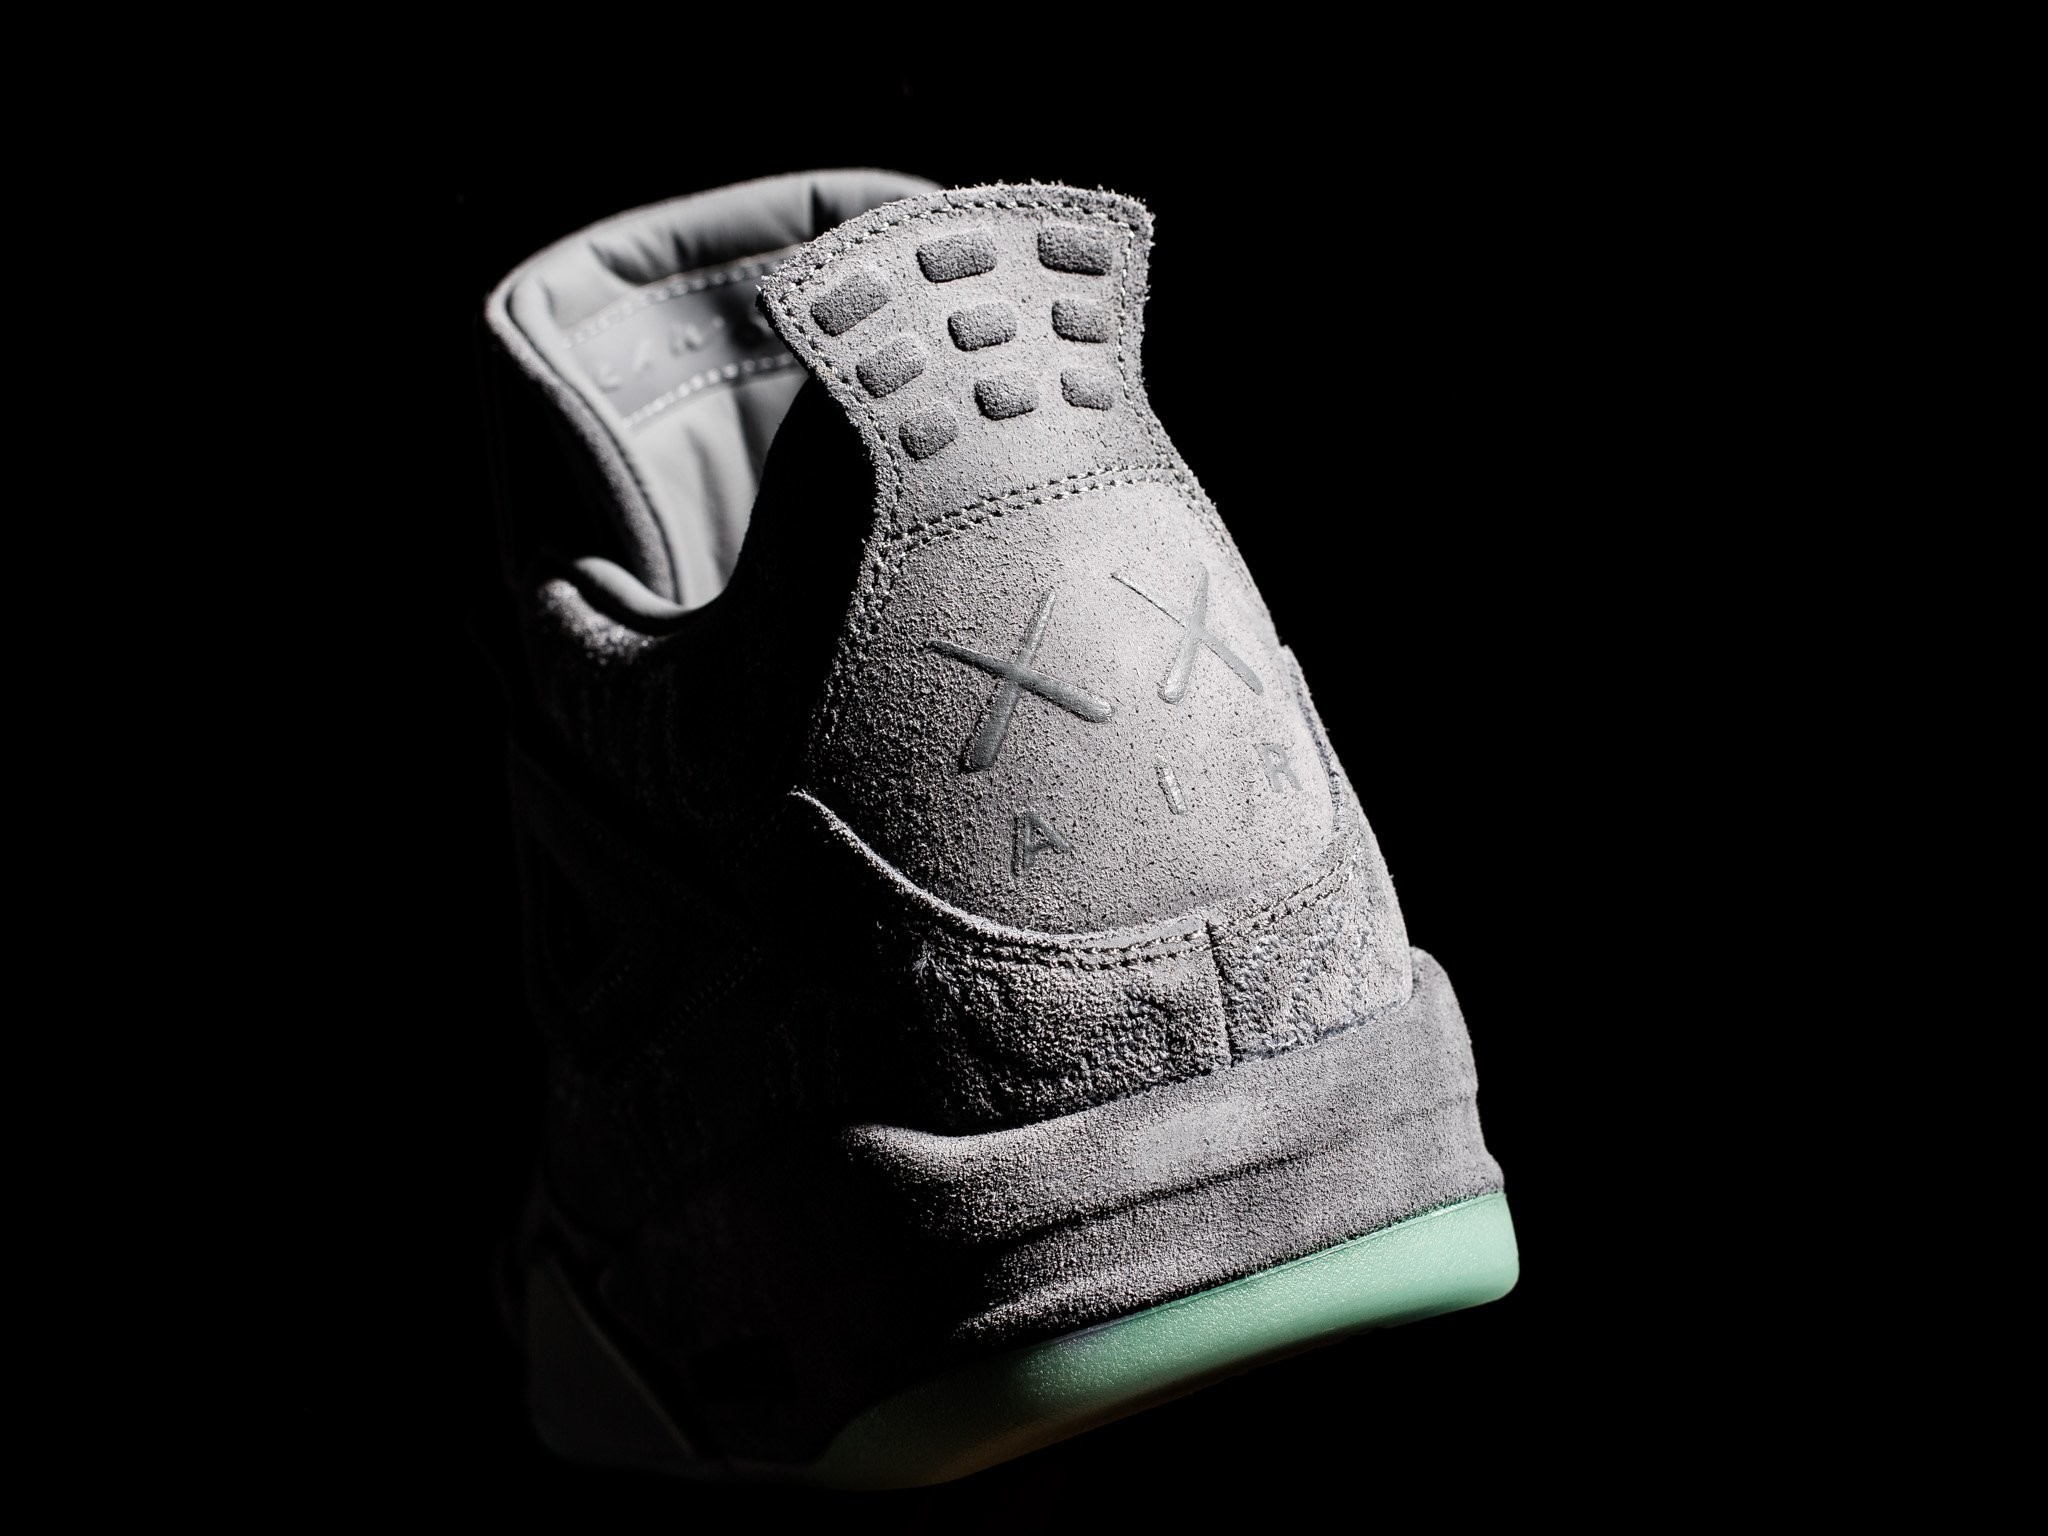 2048x1536 The Air Jordan 4 Retro “KAWS” is the first ever collaborative project  between the Jordan Brand and KAWS that takes the retro sneaker design past  a simple ...